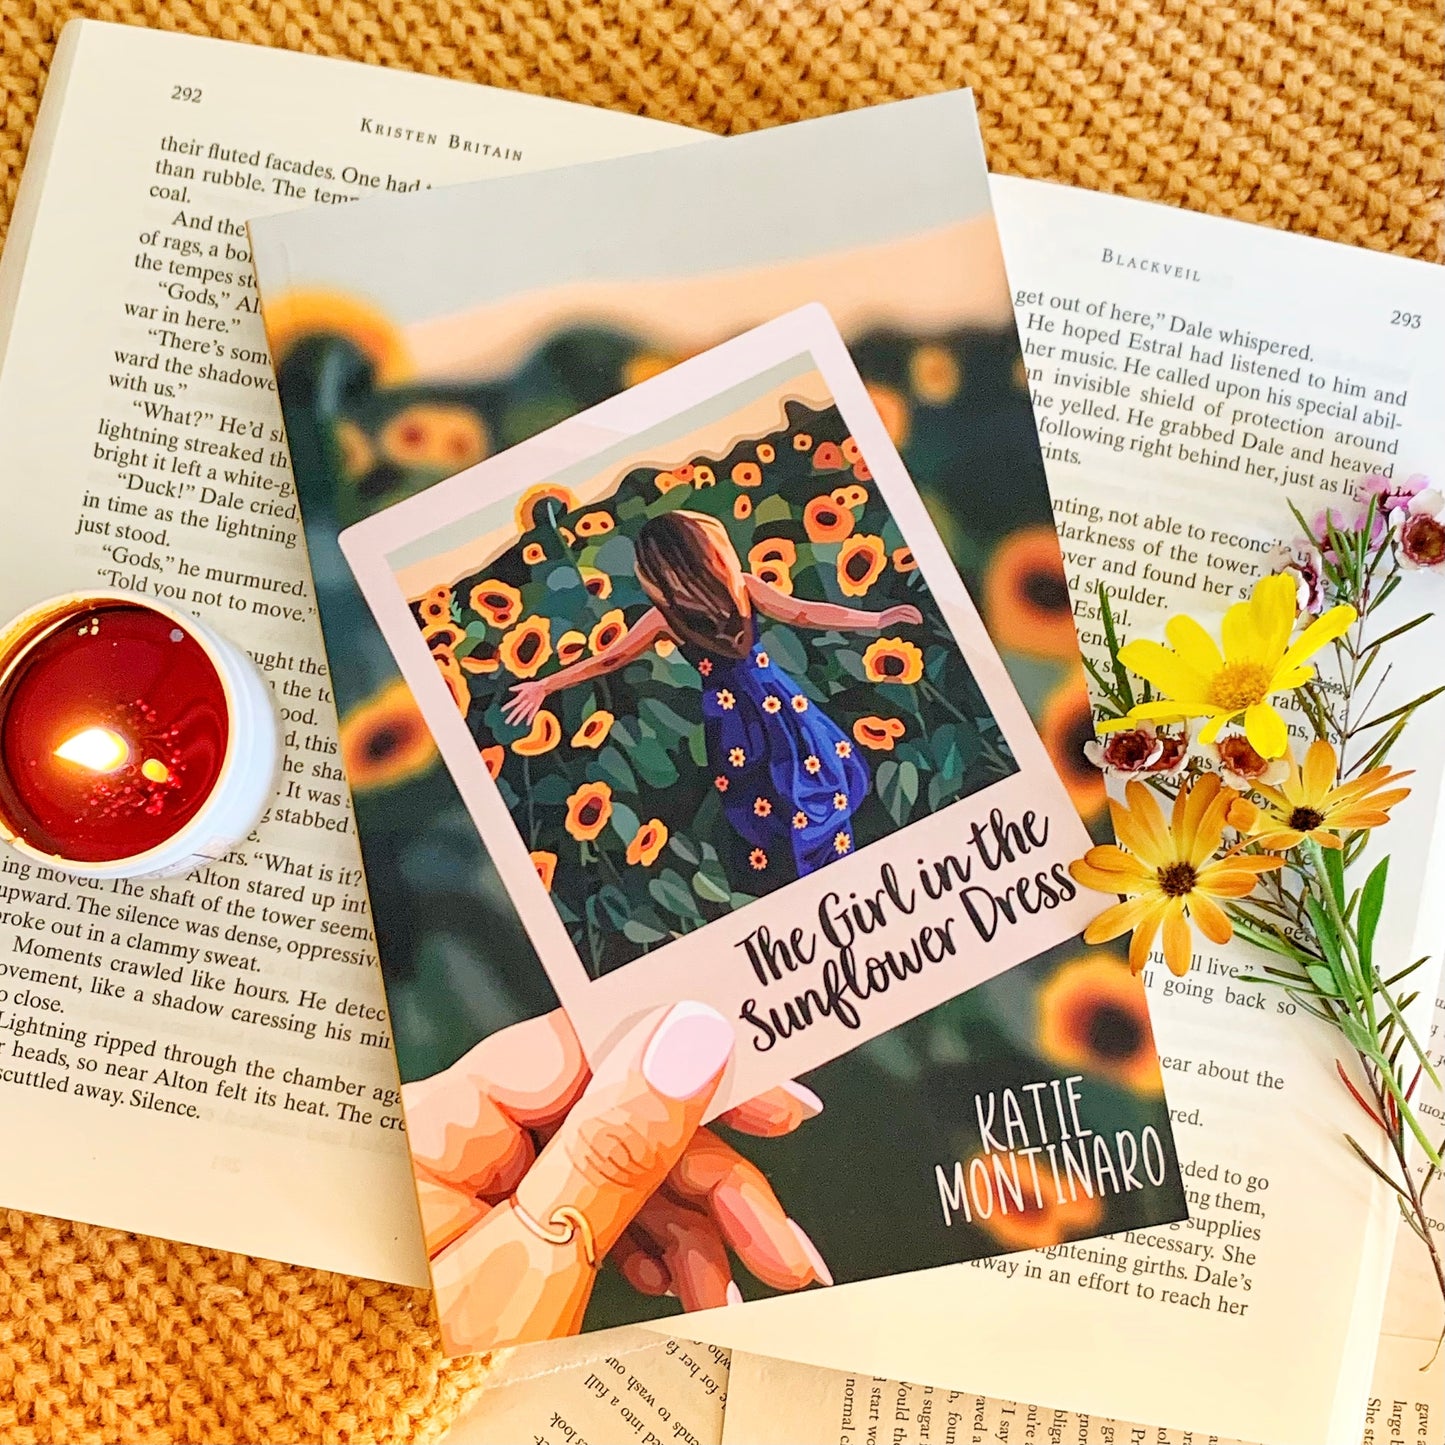 The Girl in the Sunflower Dress by Katie Montinaro